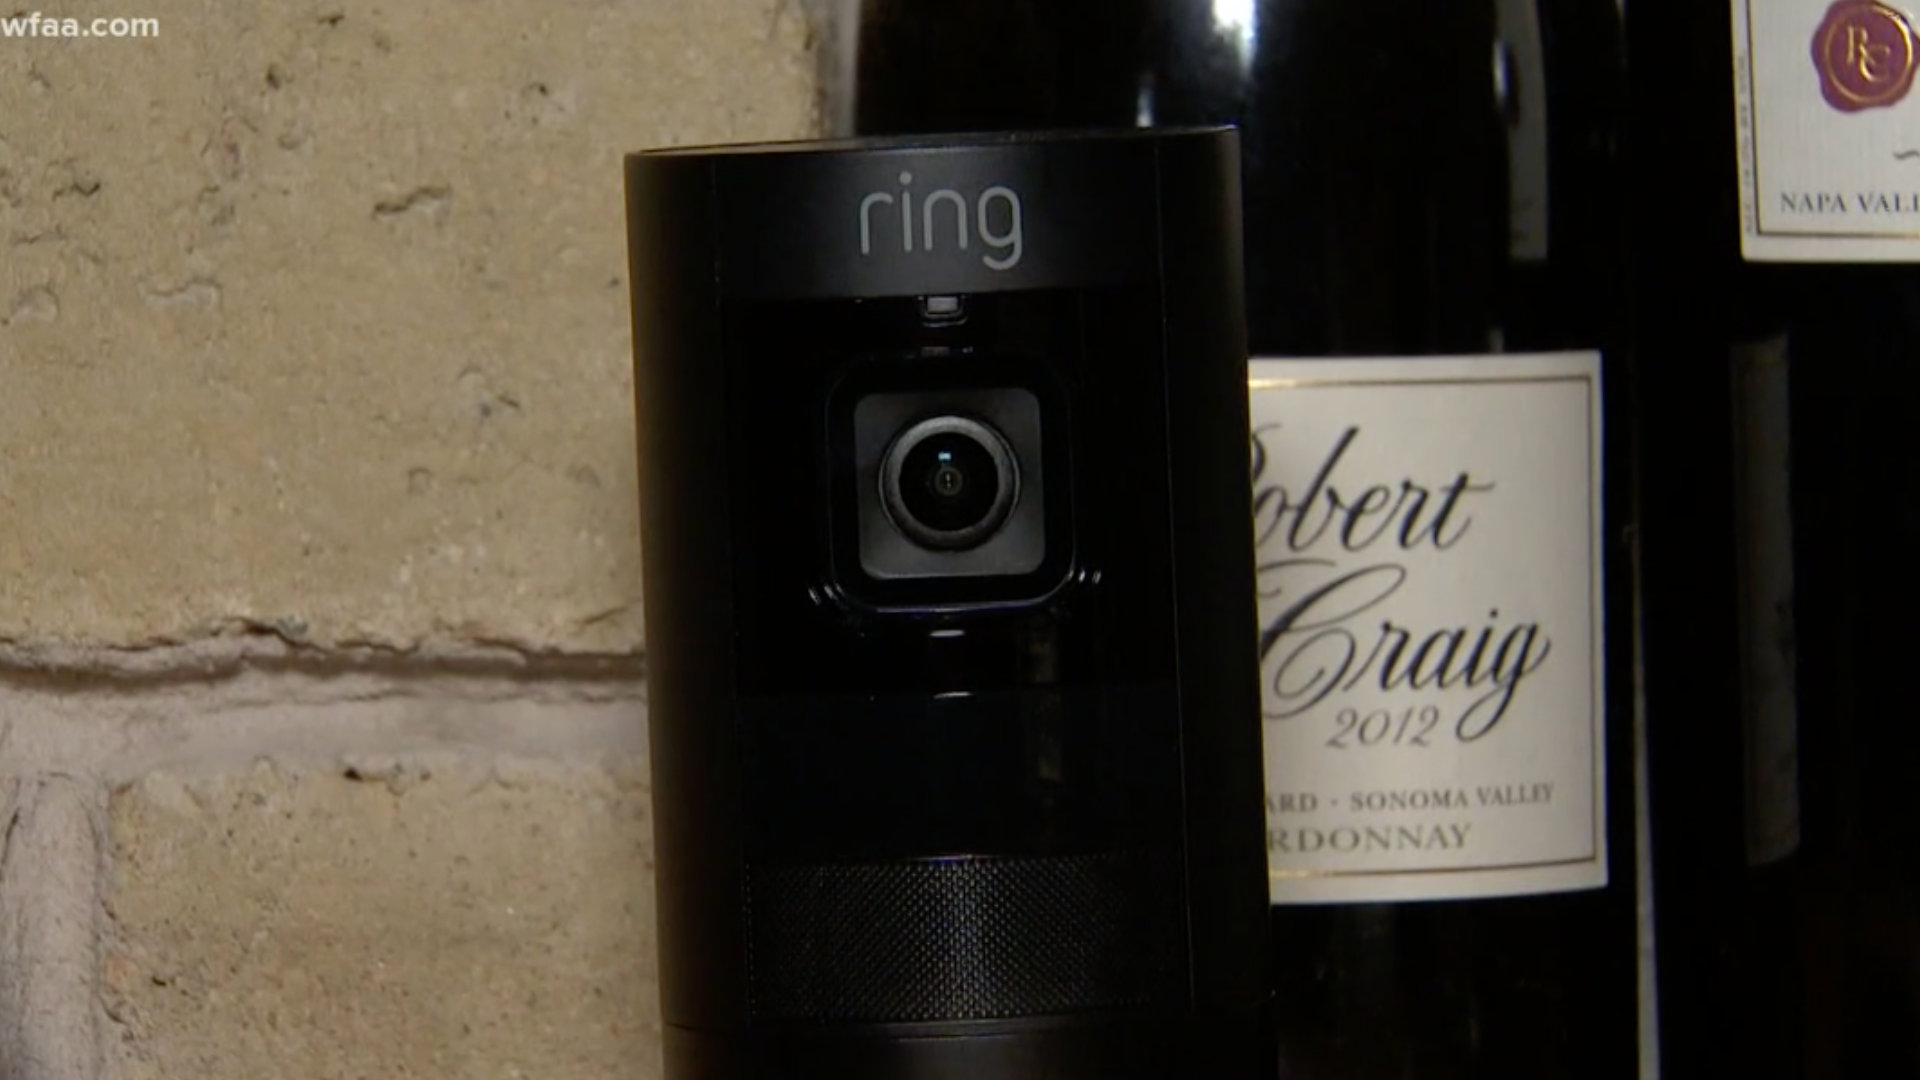 In just the last week, a number of disturbing Ring hack videos have surfaced online and the company is now investigating further to protect its devices and customers